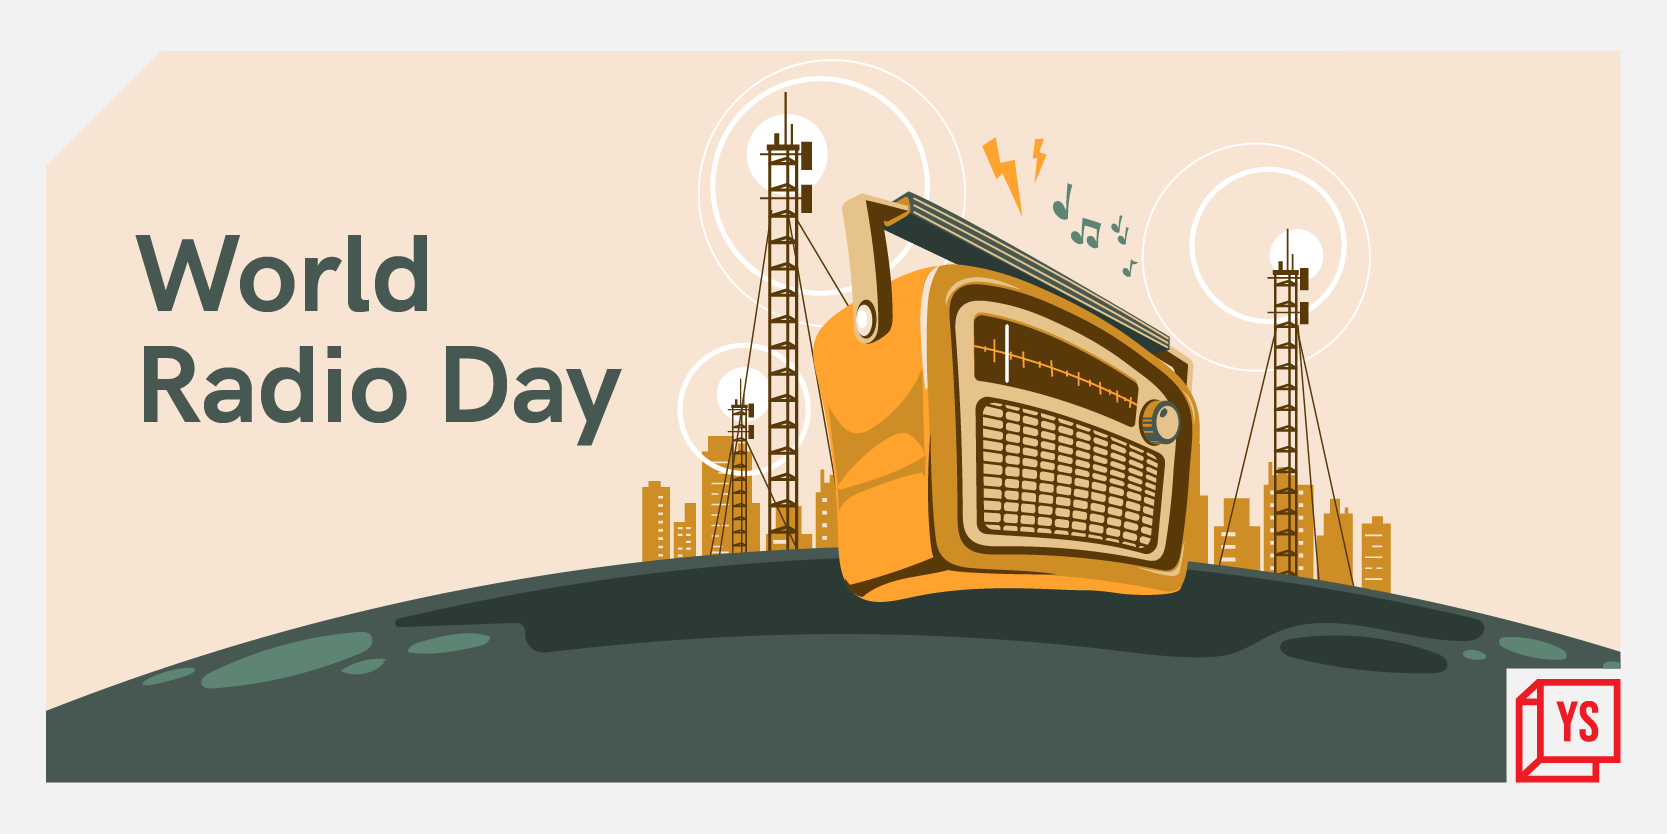 World Radio Day: How radios went from being a rarity to ruling the airwaves and hearts of listeners